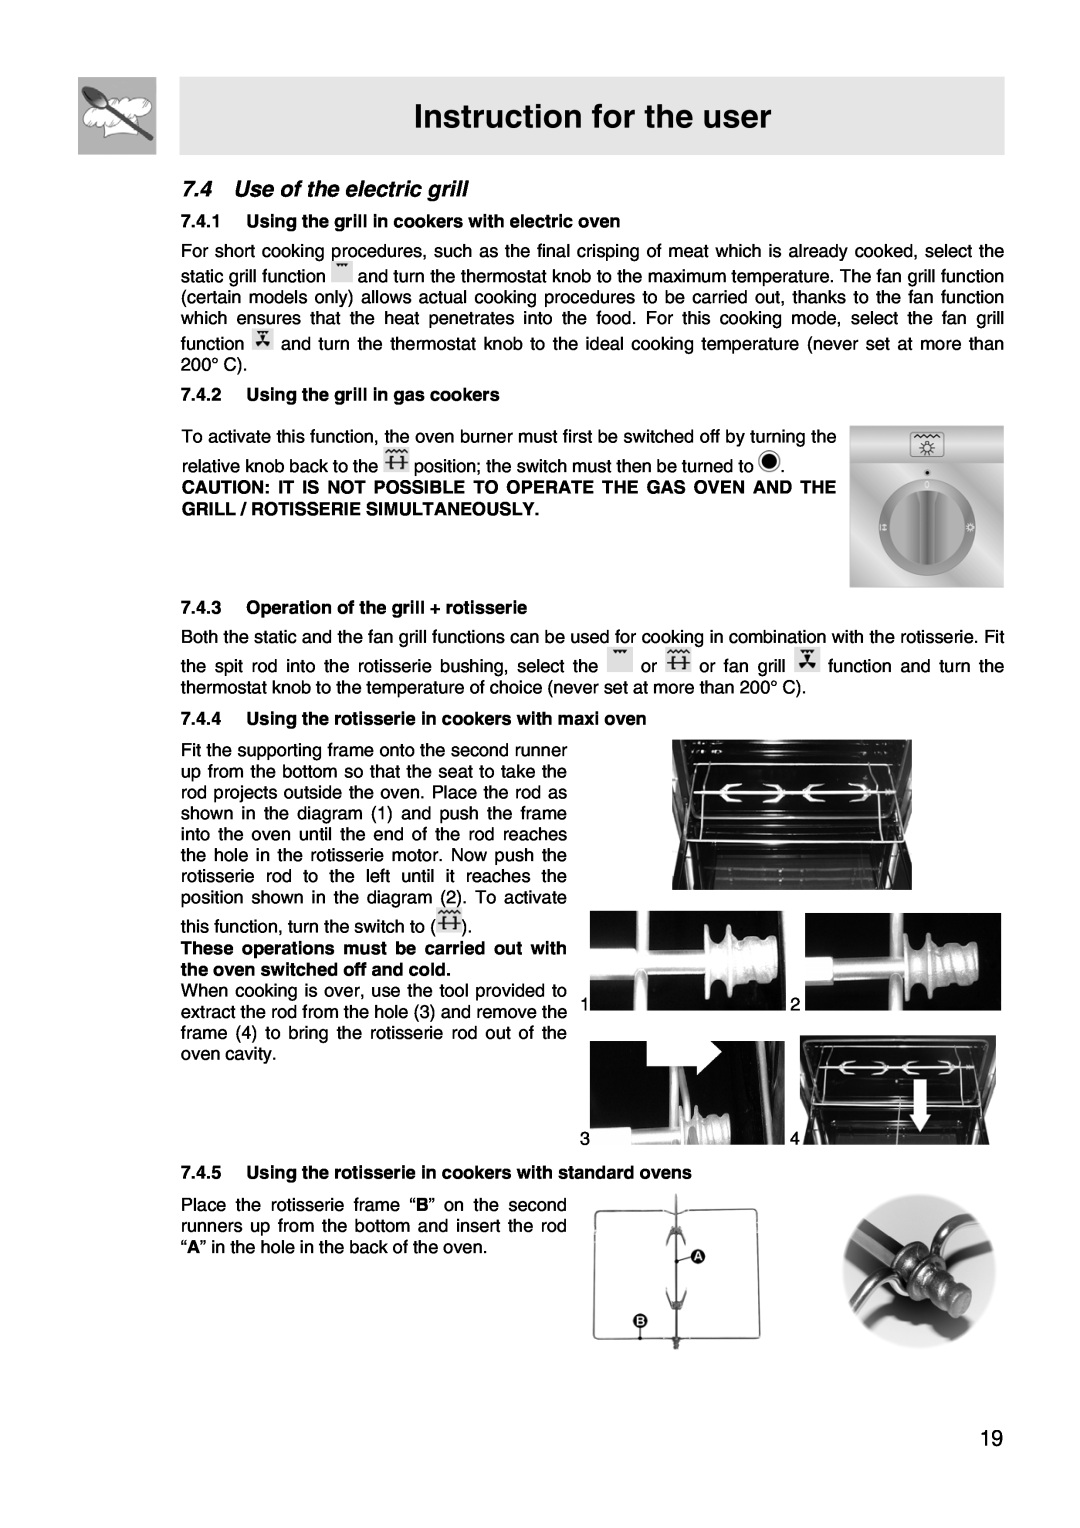 Smeg VA61XVG, VA91XVG Use of the electric grill, Instruction for the user, Using the grill in cookers with electric oven 